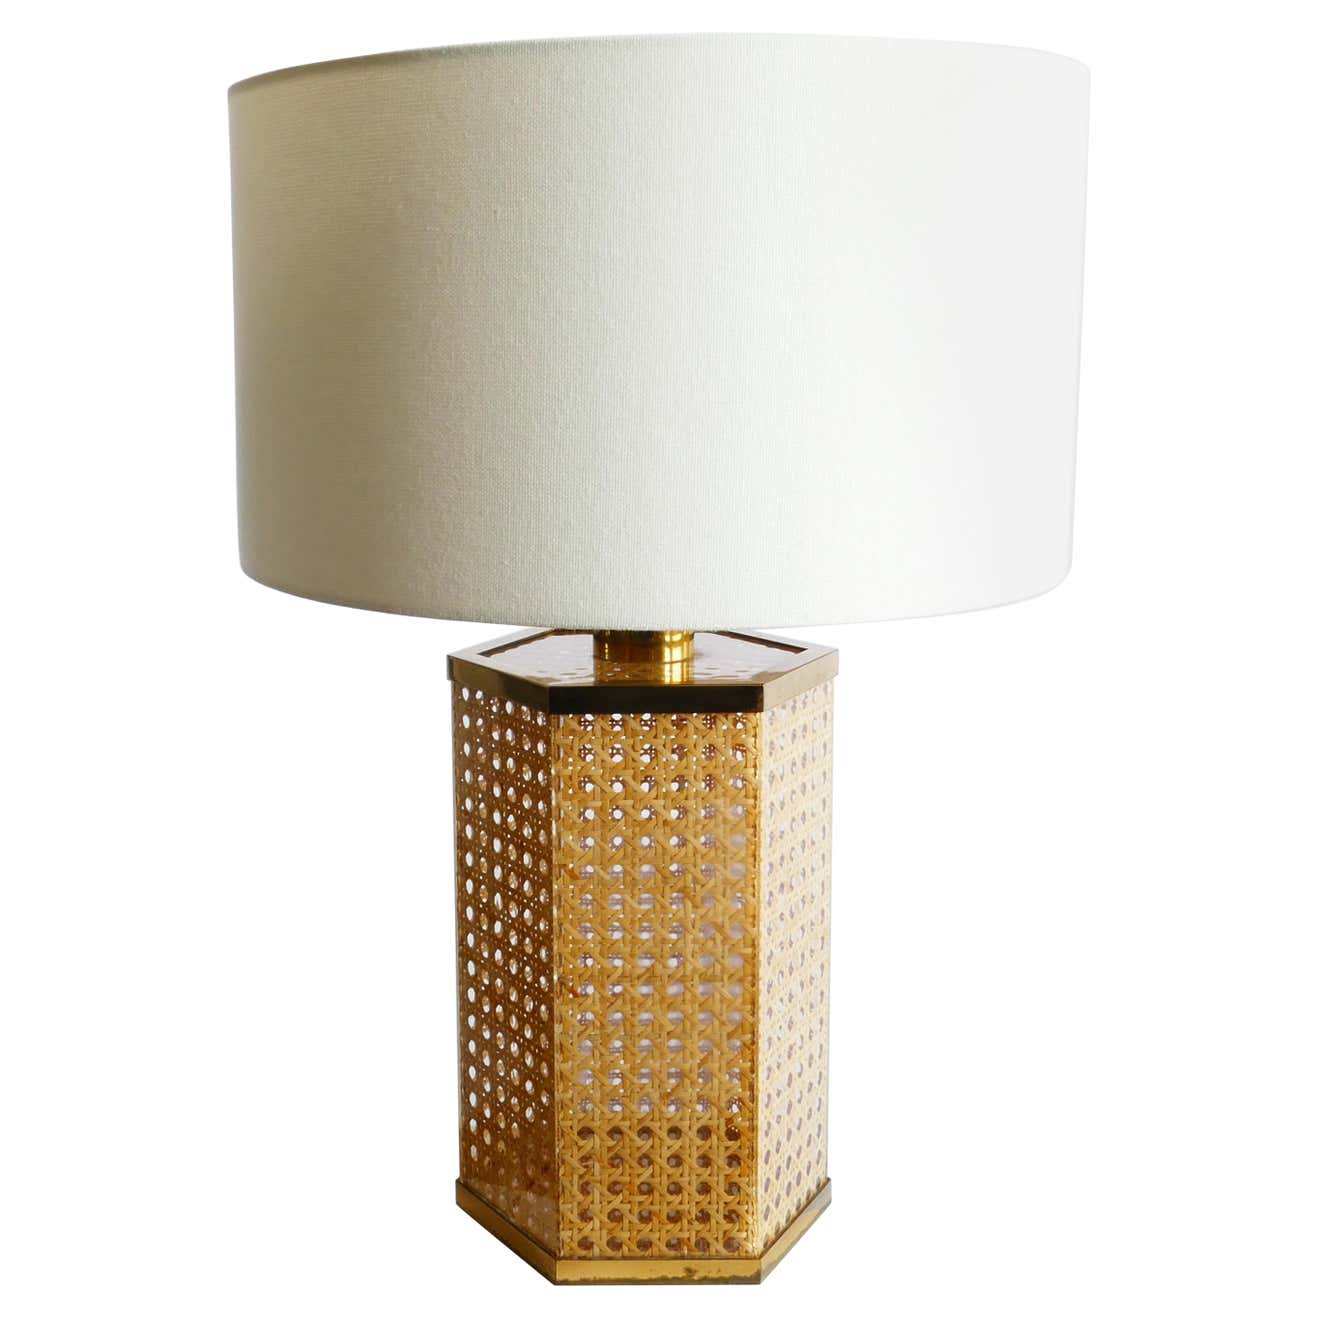 Sold - Rattan,Lucite and Brass Table Lamp, Italy, 1970s